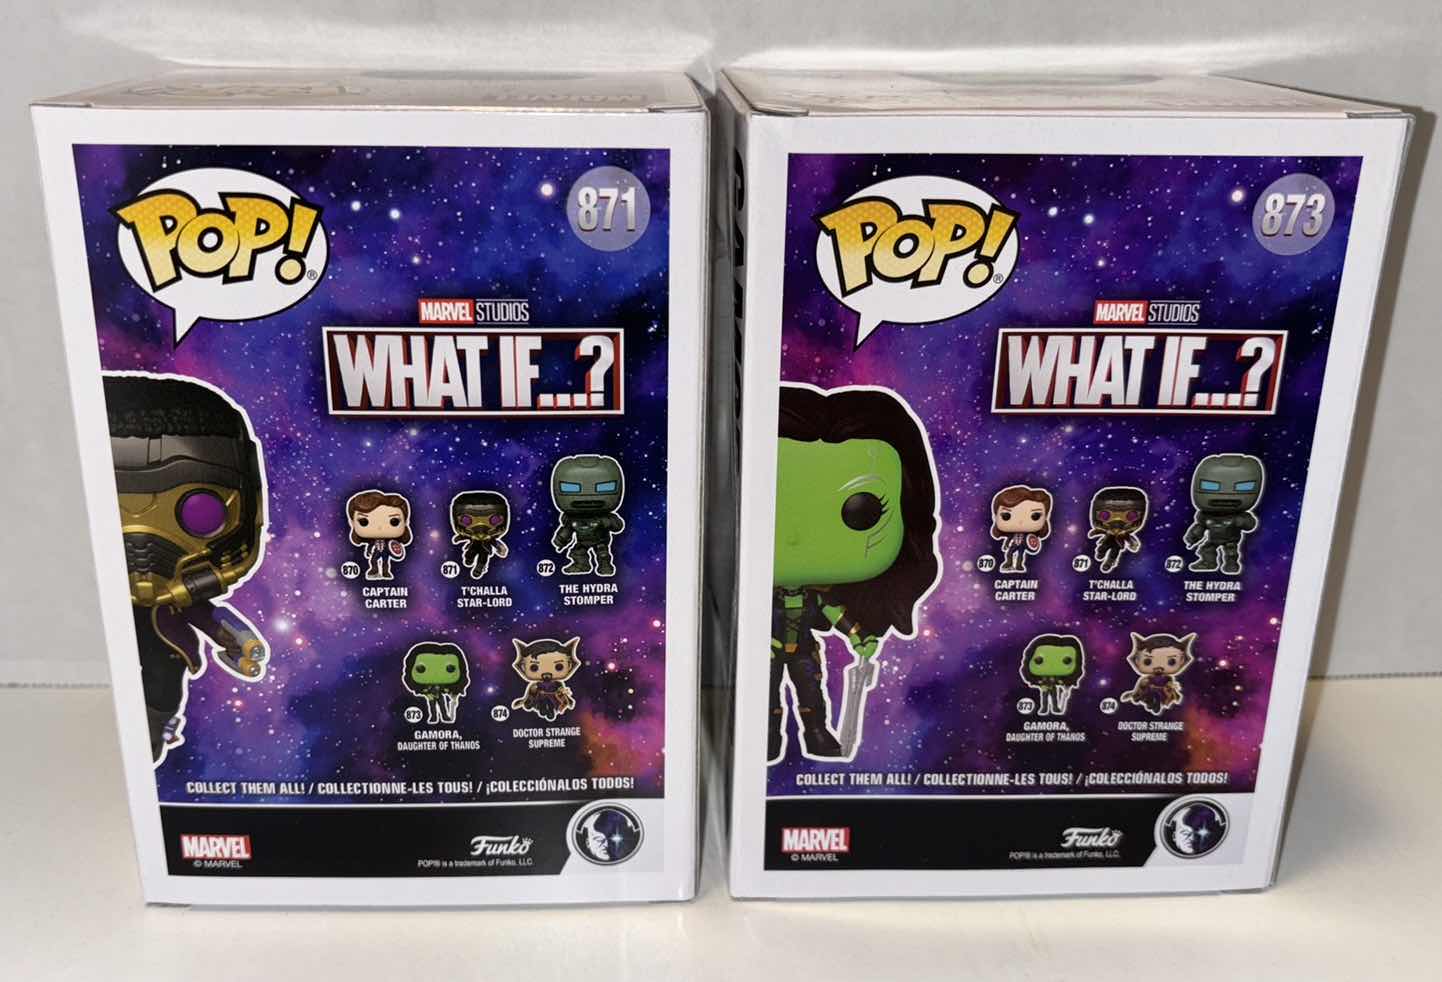 Photo 5 of NEW FUNKO POP! 2-PACK MARVEL STUDIOS WHAT IF…? VINYL BOBBLE-HEAD FIGURES, #871 T’CHALLA STAR-LORD & #873 GAMORA DAUGHTER OF THANOS